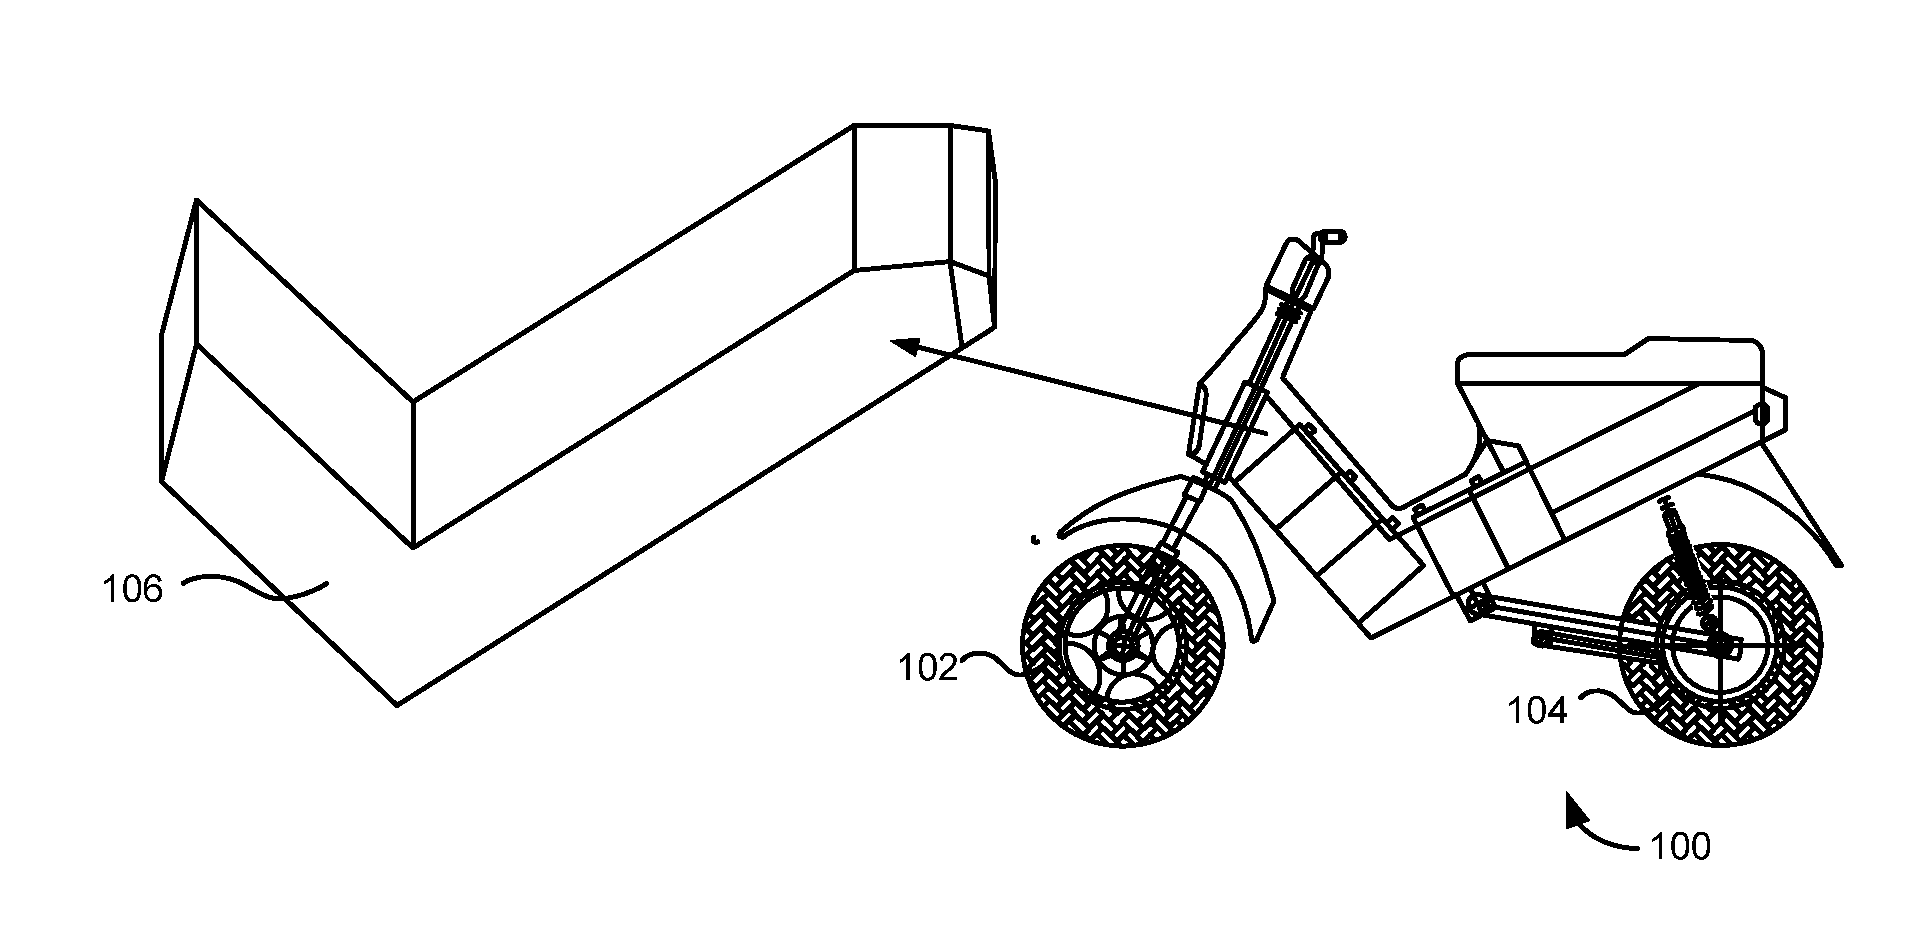 Monocoque structure of an electrically powered motorized vehicle